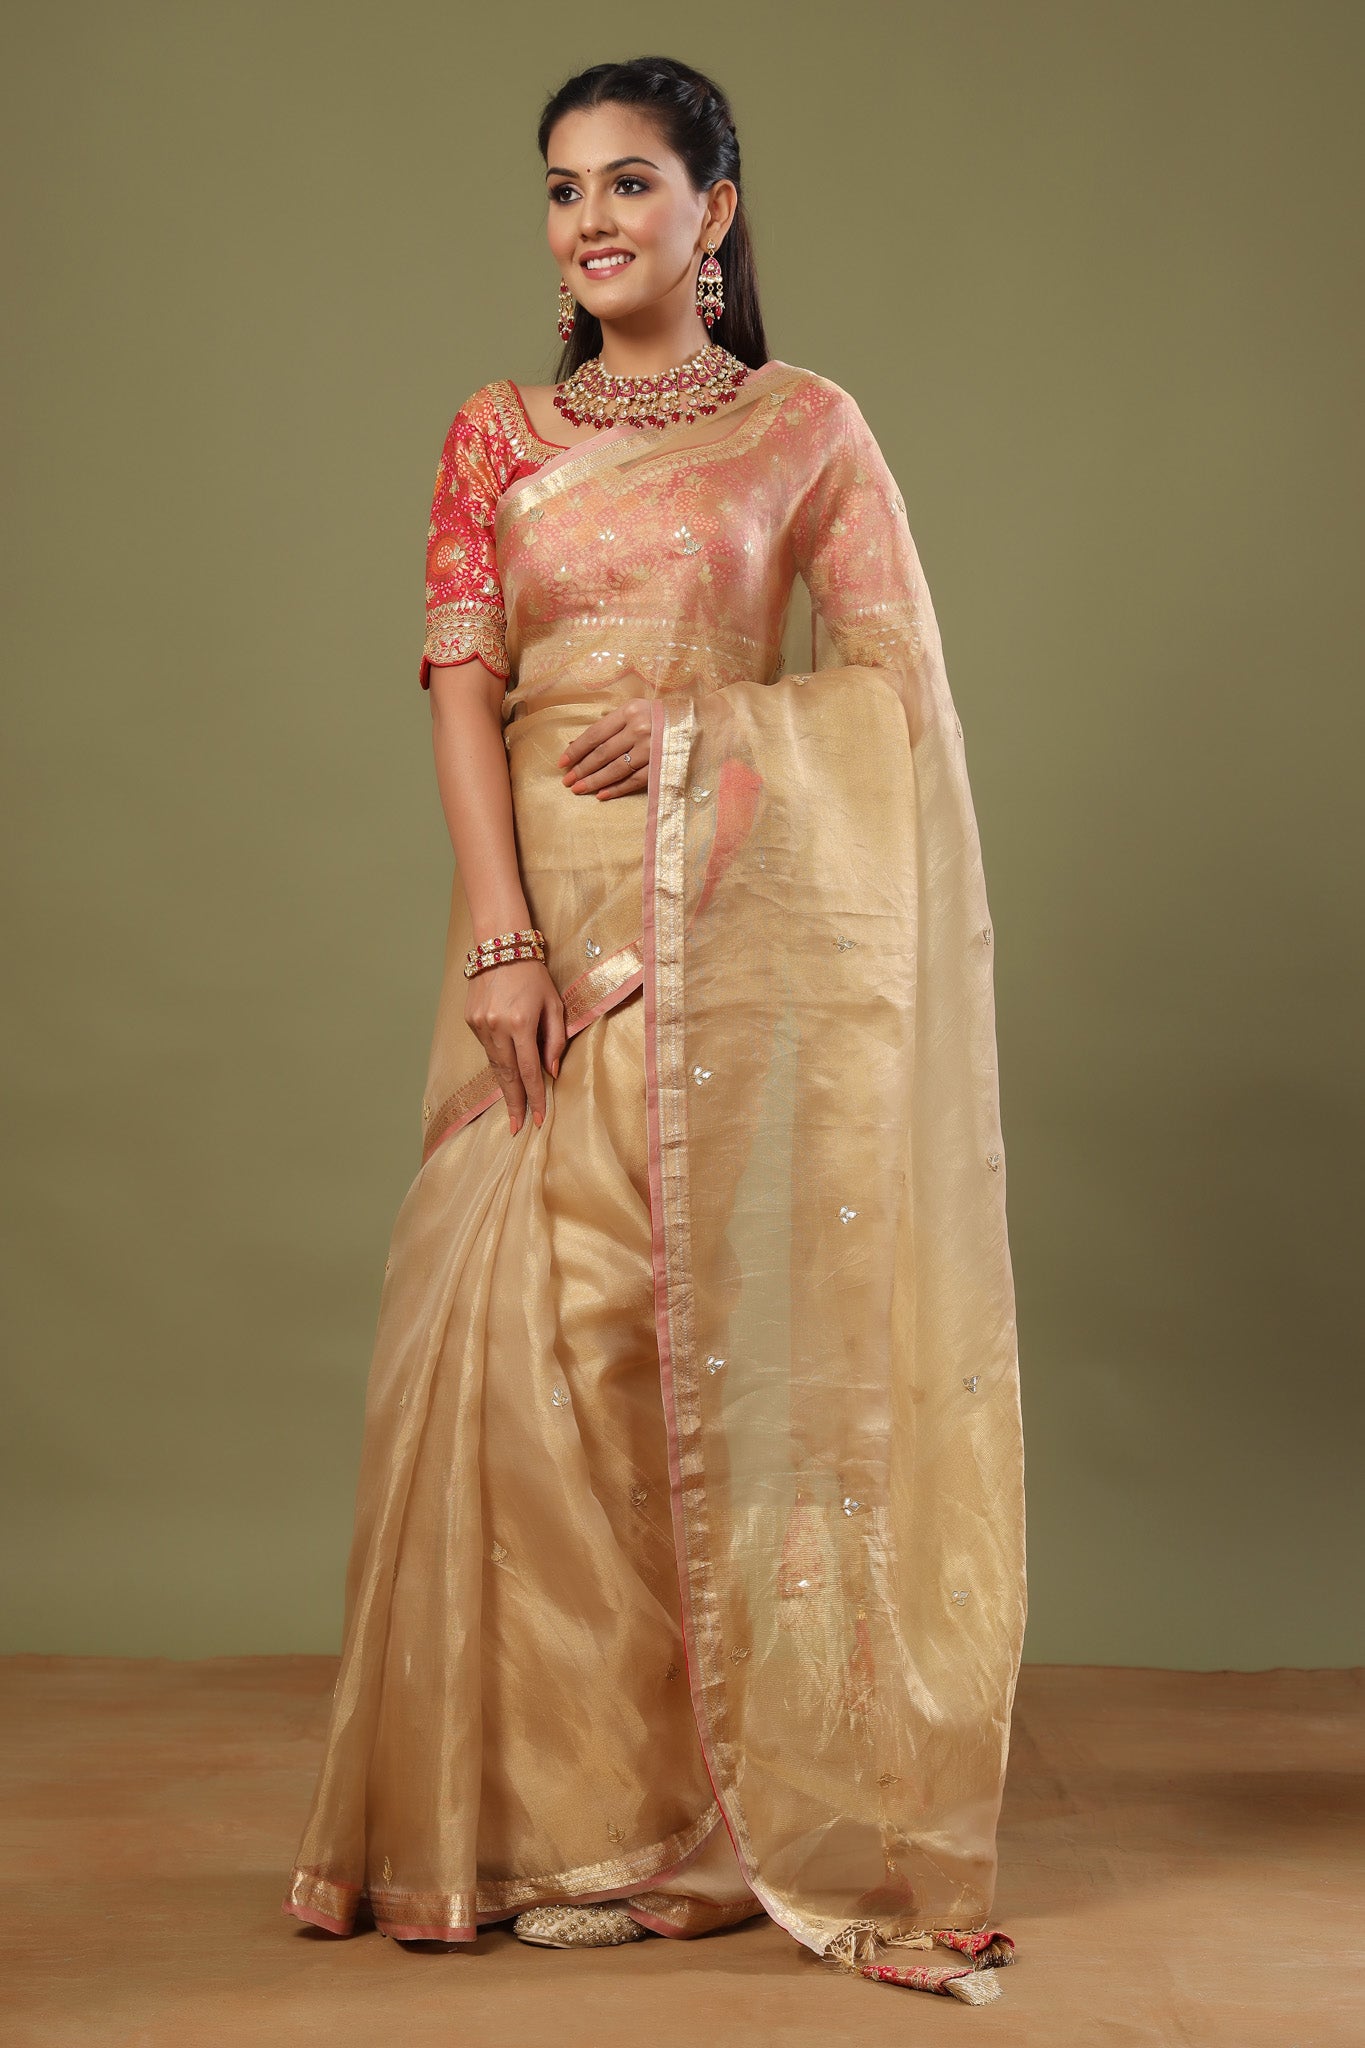 Buy golden tissue silk sari online in USA with pink embroidered blouse. Make a fashion statement at weddings with stunning designer sarees, embroidered sarees with blouse, wedding sarees, handloom sarees from Pure Elegance Indian fashion store in USA.-pallu